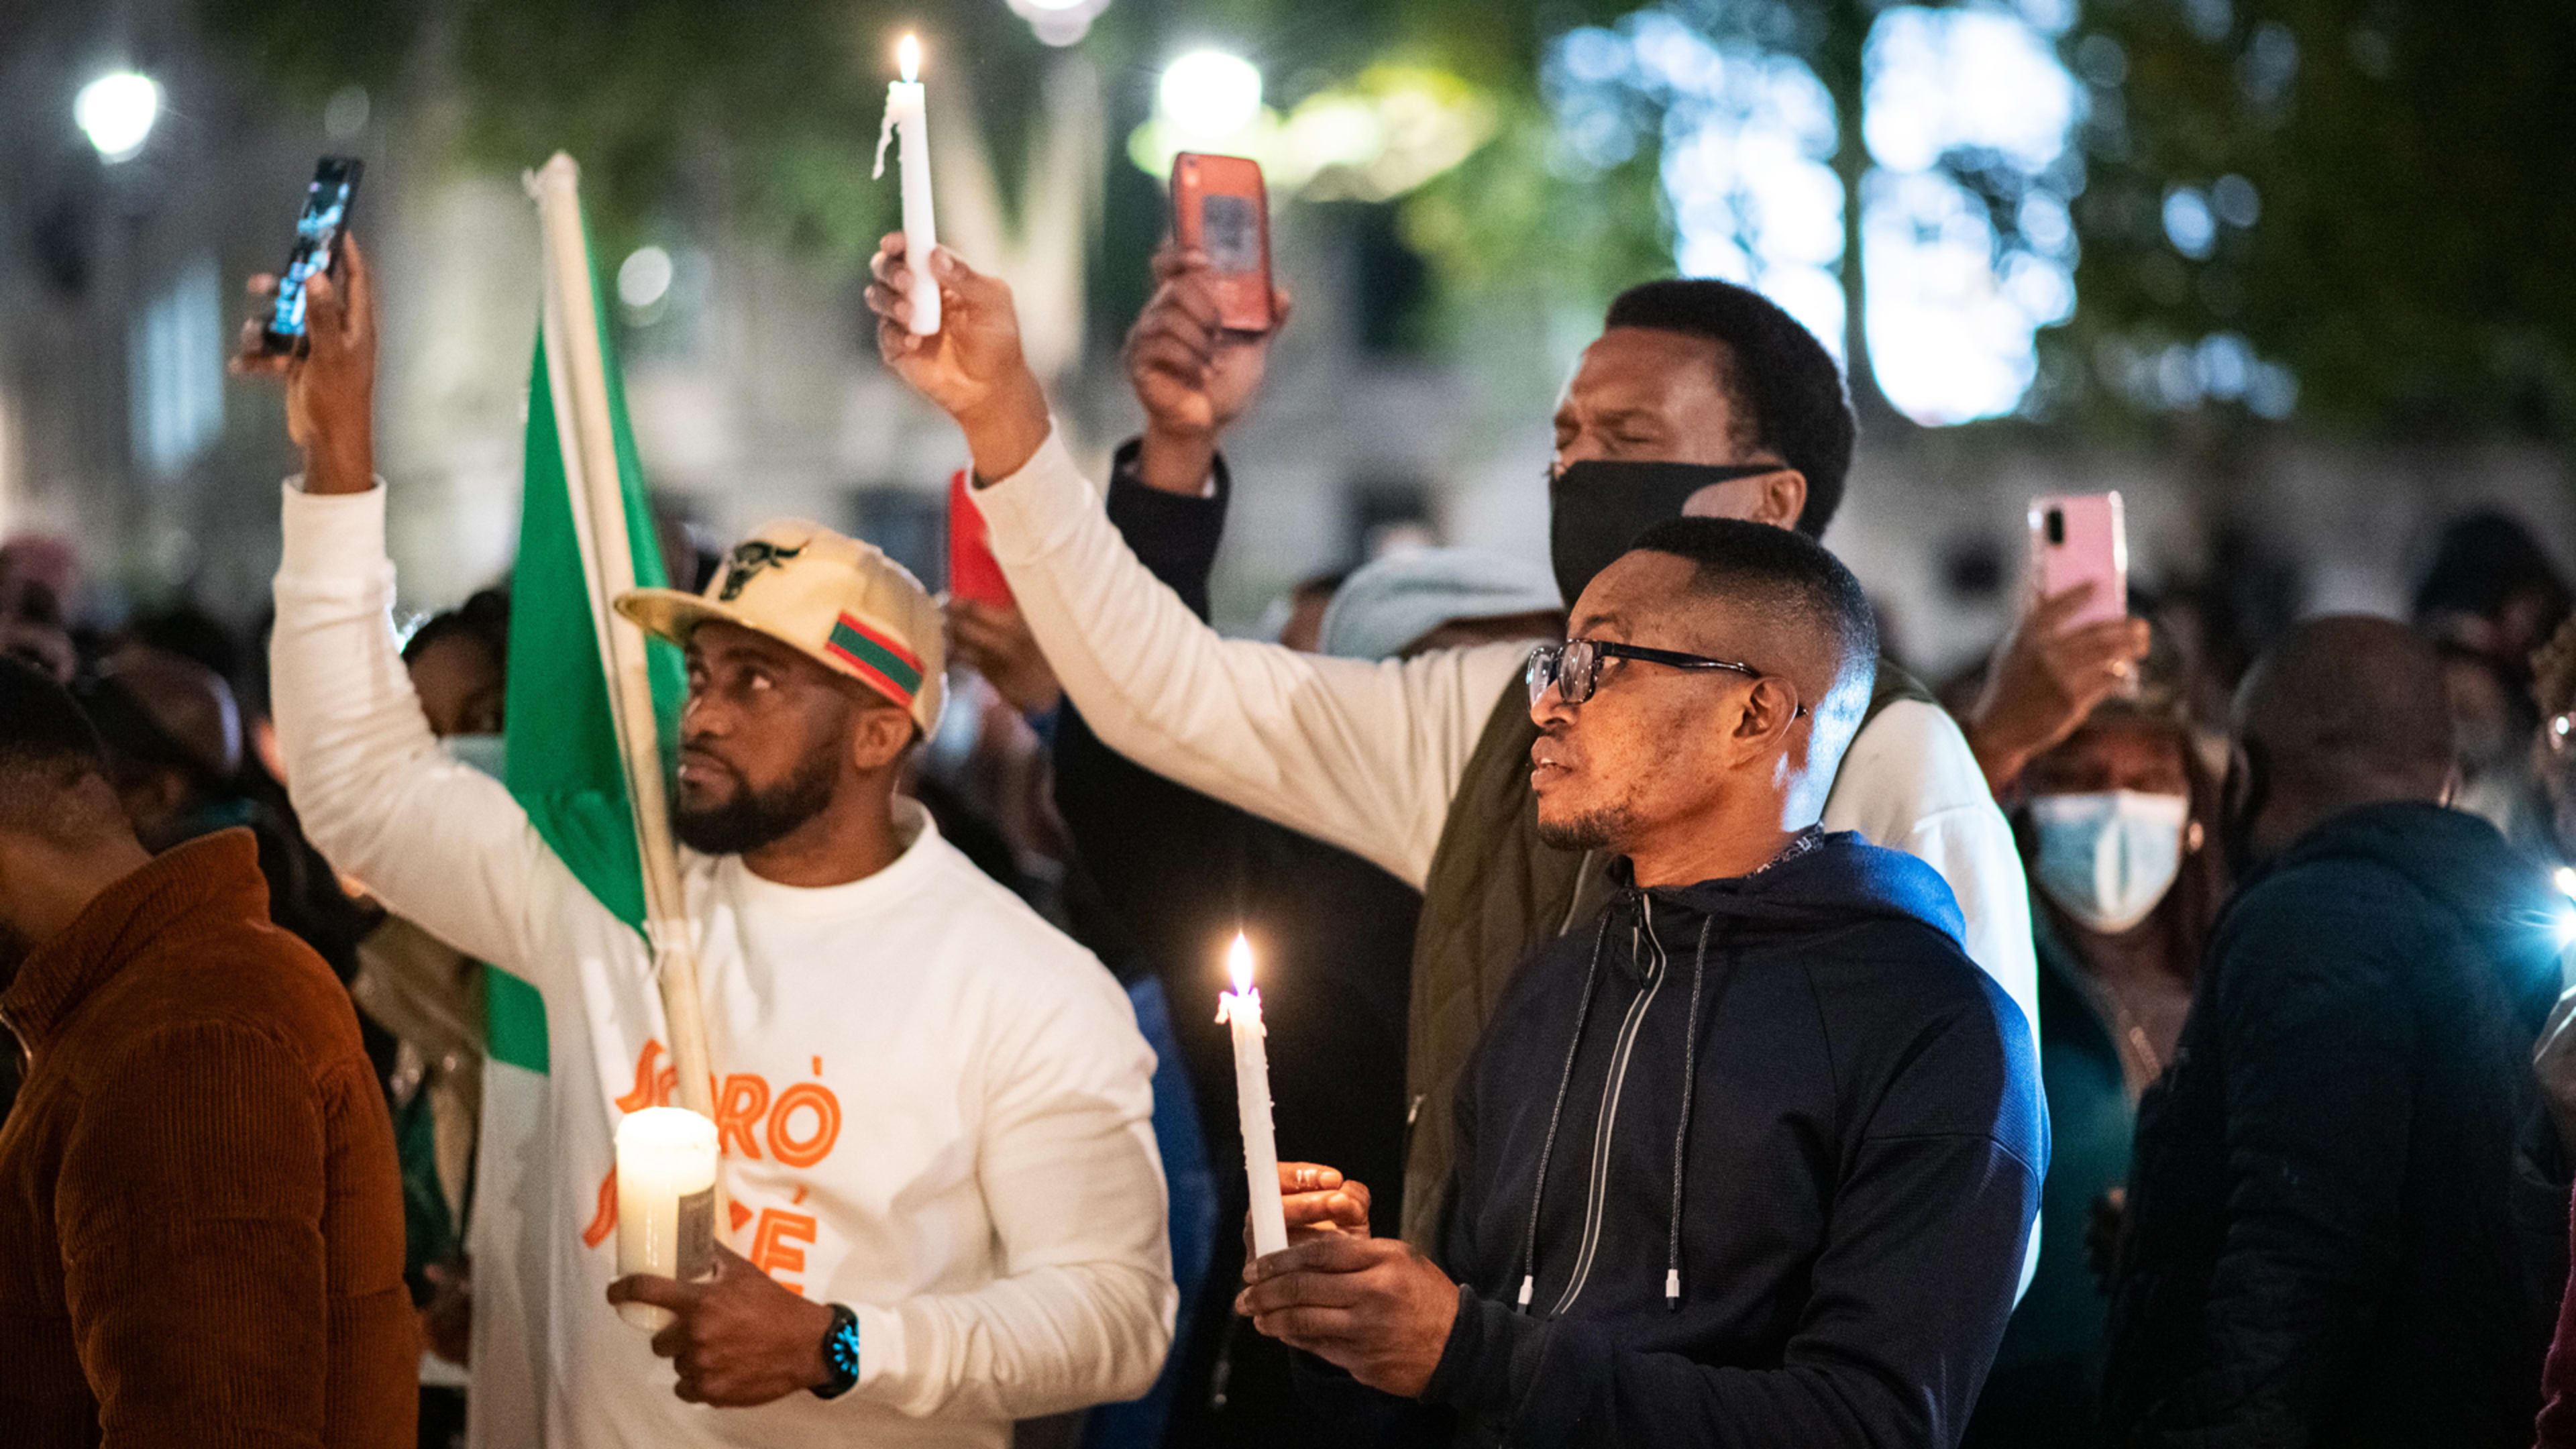 How to help Nigeria: What you can do for the ‘End SARS’ protest movement right now